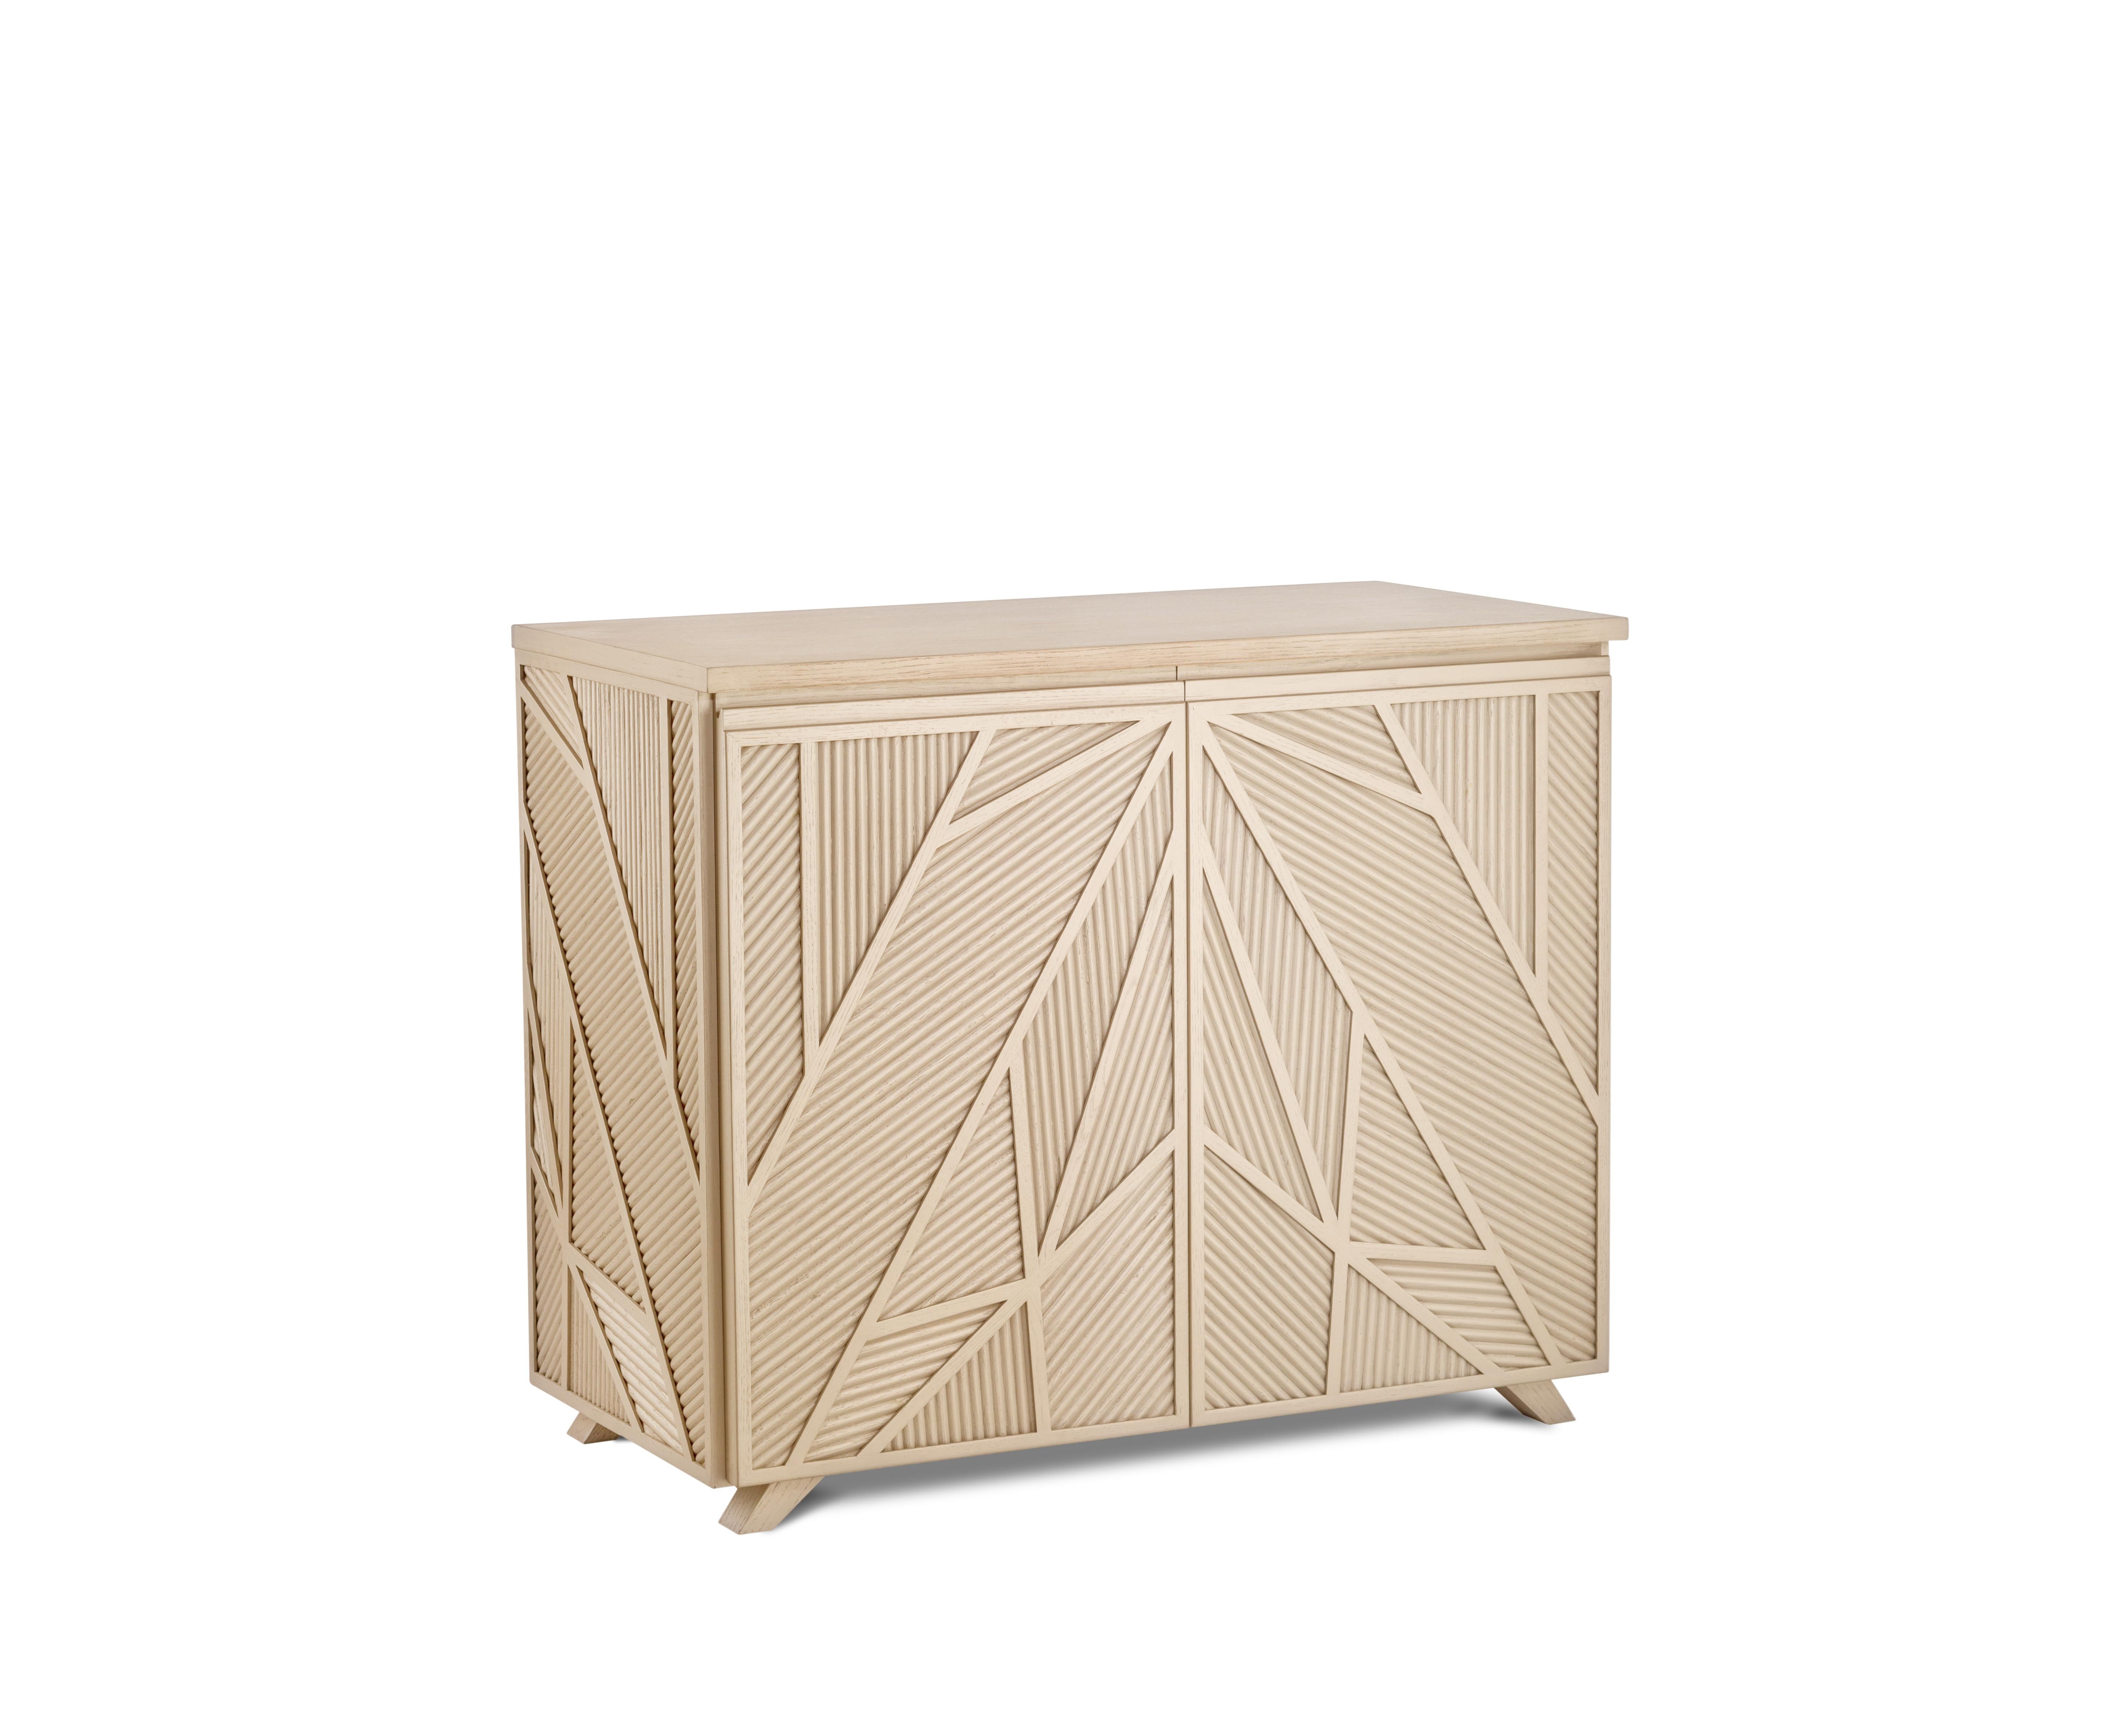 Stained Geometric Oak Sticks Cabinet Inspired from Ancient Egypt Use of Palm Branches For Sale